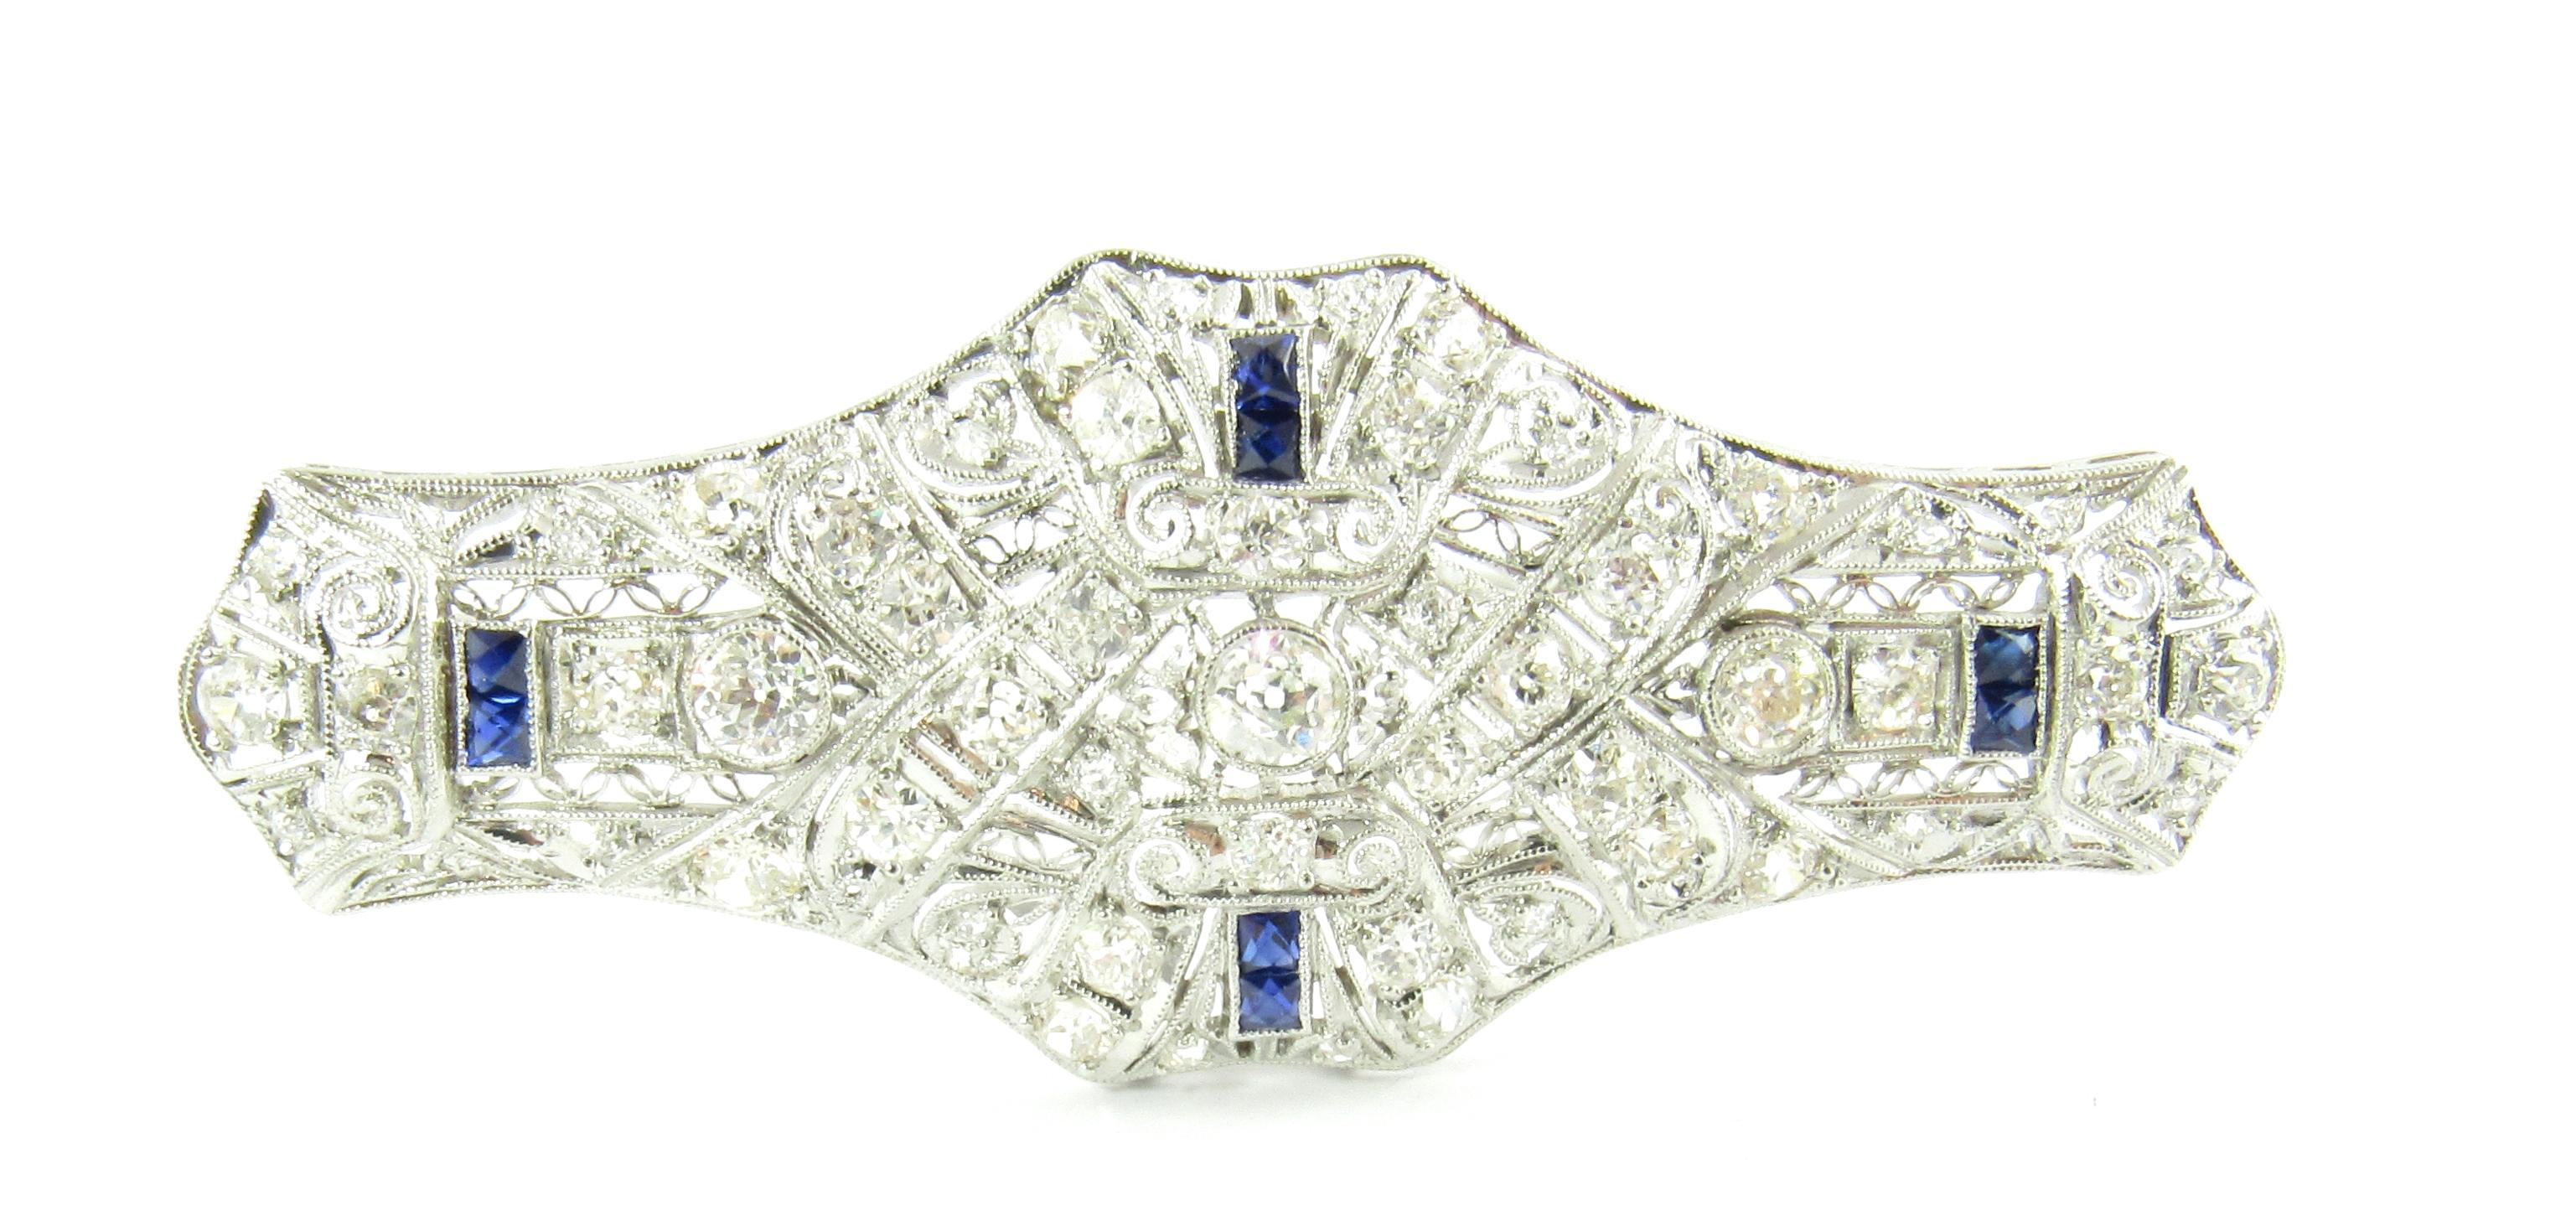 Vintage 14 Karat White Gold Diamond and Lab Created Sapphire Brooch/Pin-

This spectacular brooch features four rectangular blue sapphires and 48 European/Old Mine cut diamonds set in stunning white gold filigree.

Approximate total diamond weight: 